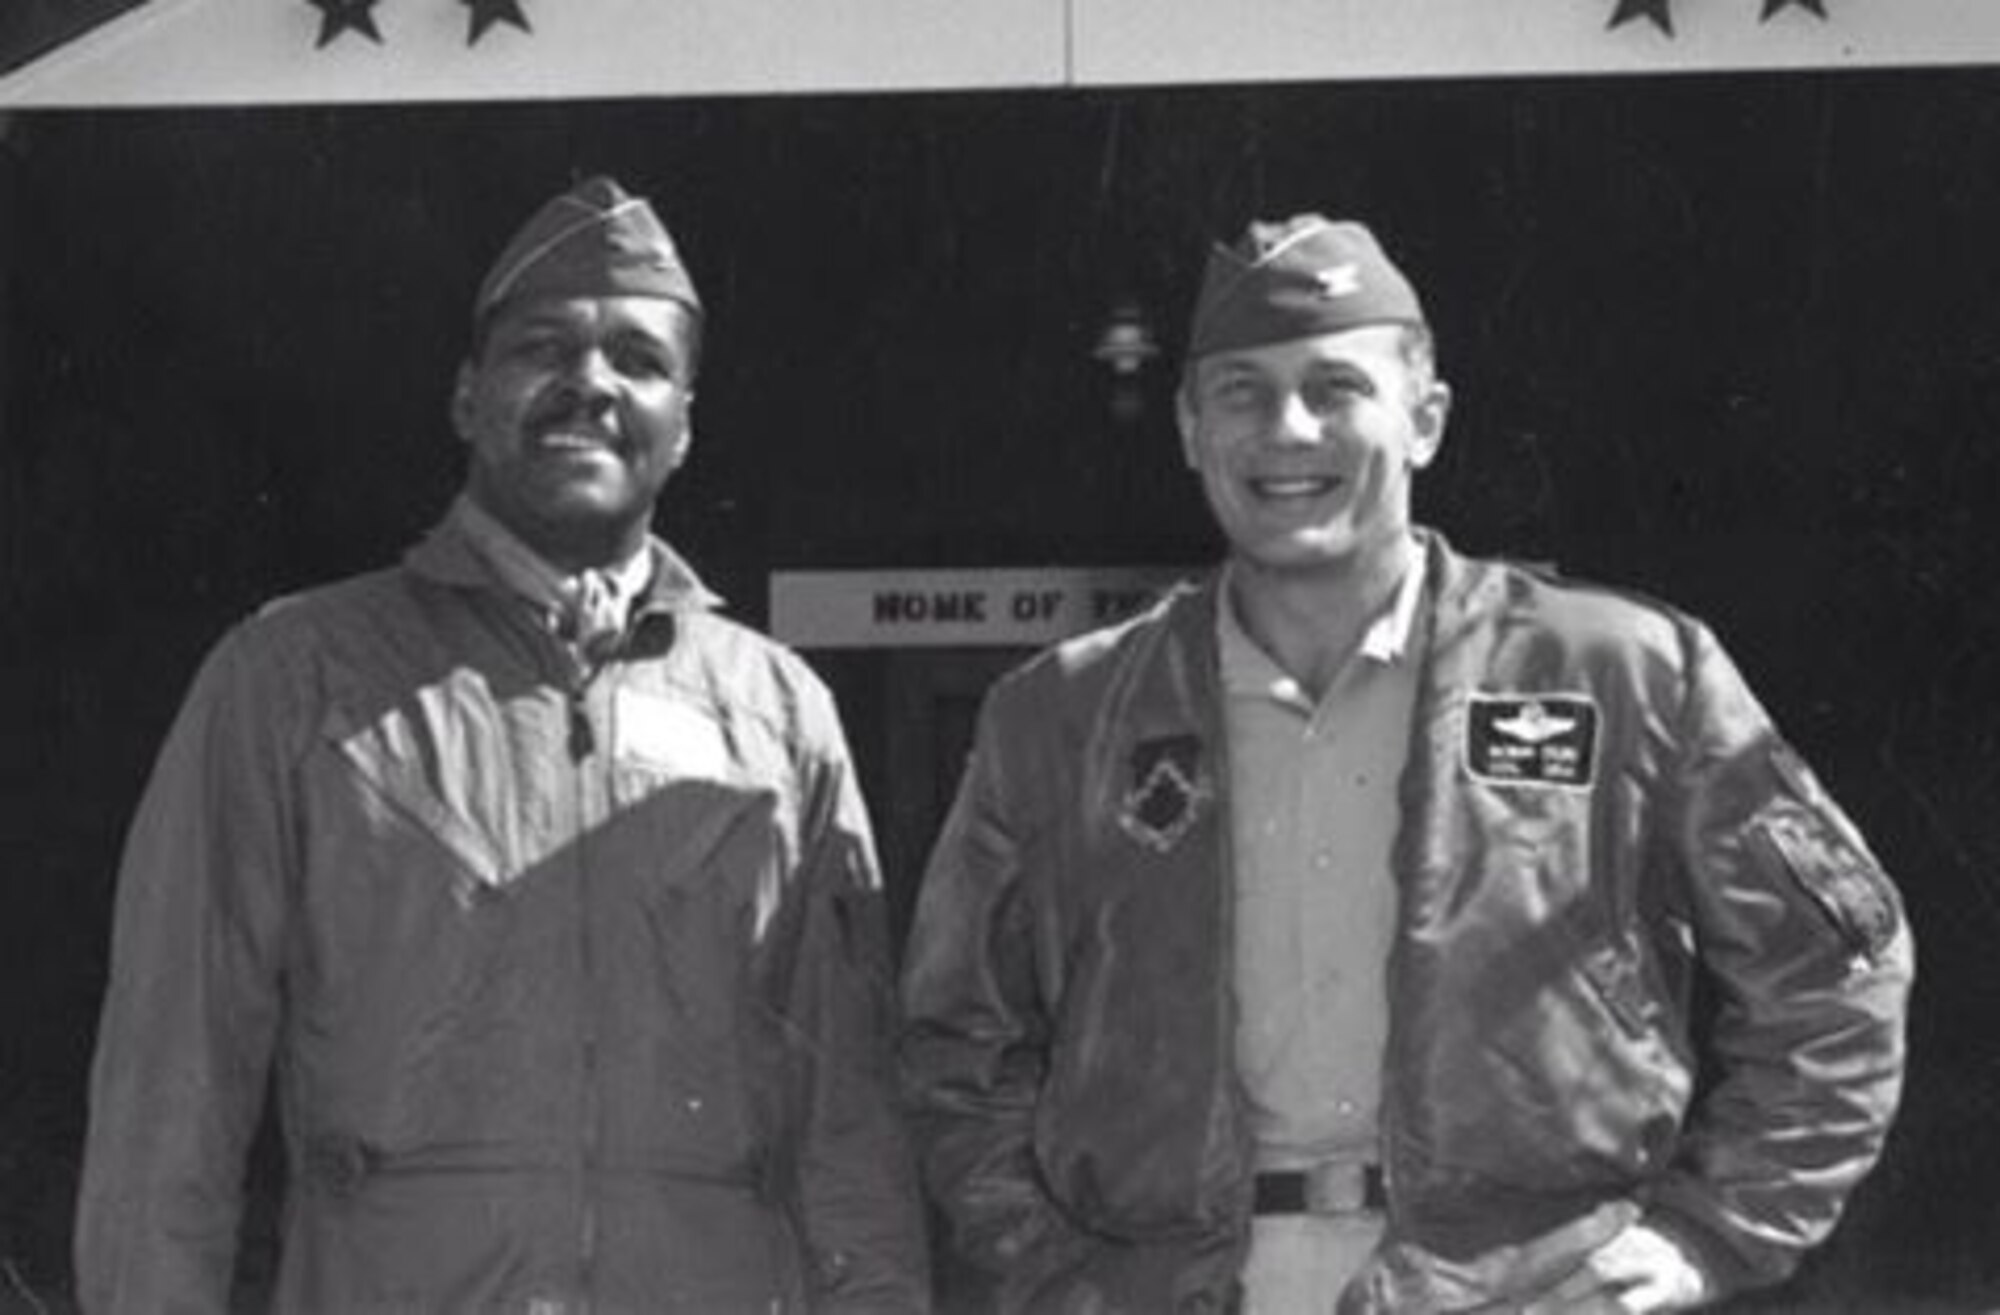 Col. Daniel “Chappie” James, left, and Col. Robin Olds, commander of the 8th Tactical Fighter Wing, stand together for a photo. Colonel James was Colonel Olds’ vice commander on deployment in South Vietnam in the late 1960s. (Courtesy photo)